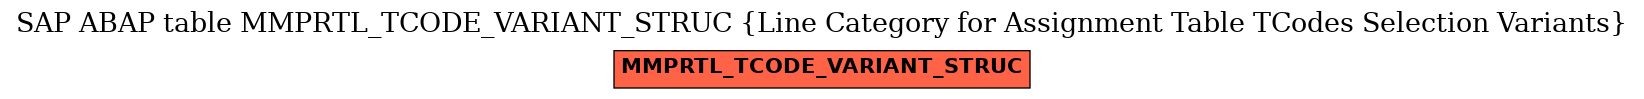 E-R Diagram for table MMPRTL_TCODE_VARIANT_STRUC (Line Category for Assignment Table TCodes Selection Variants)